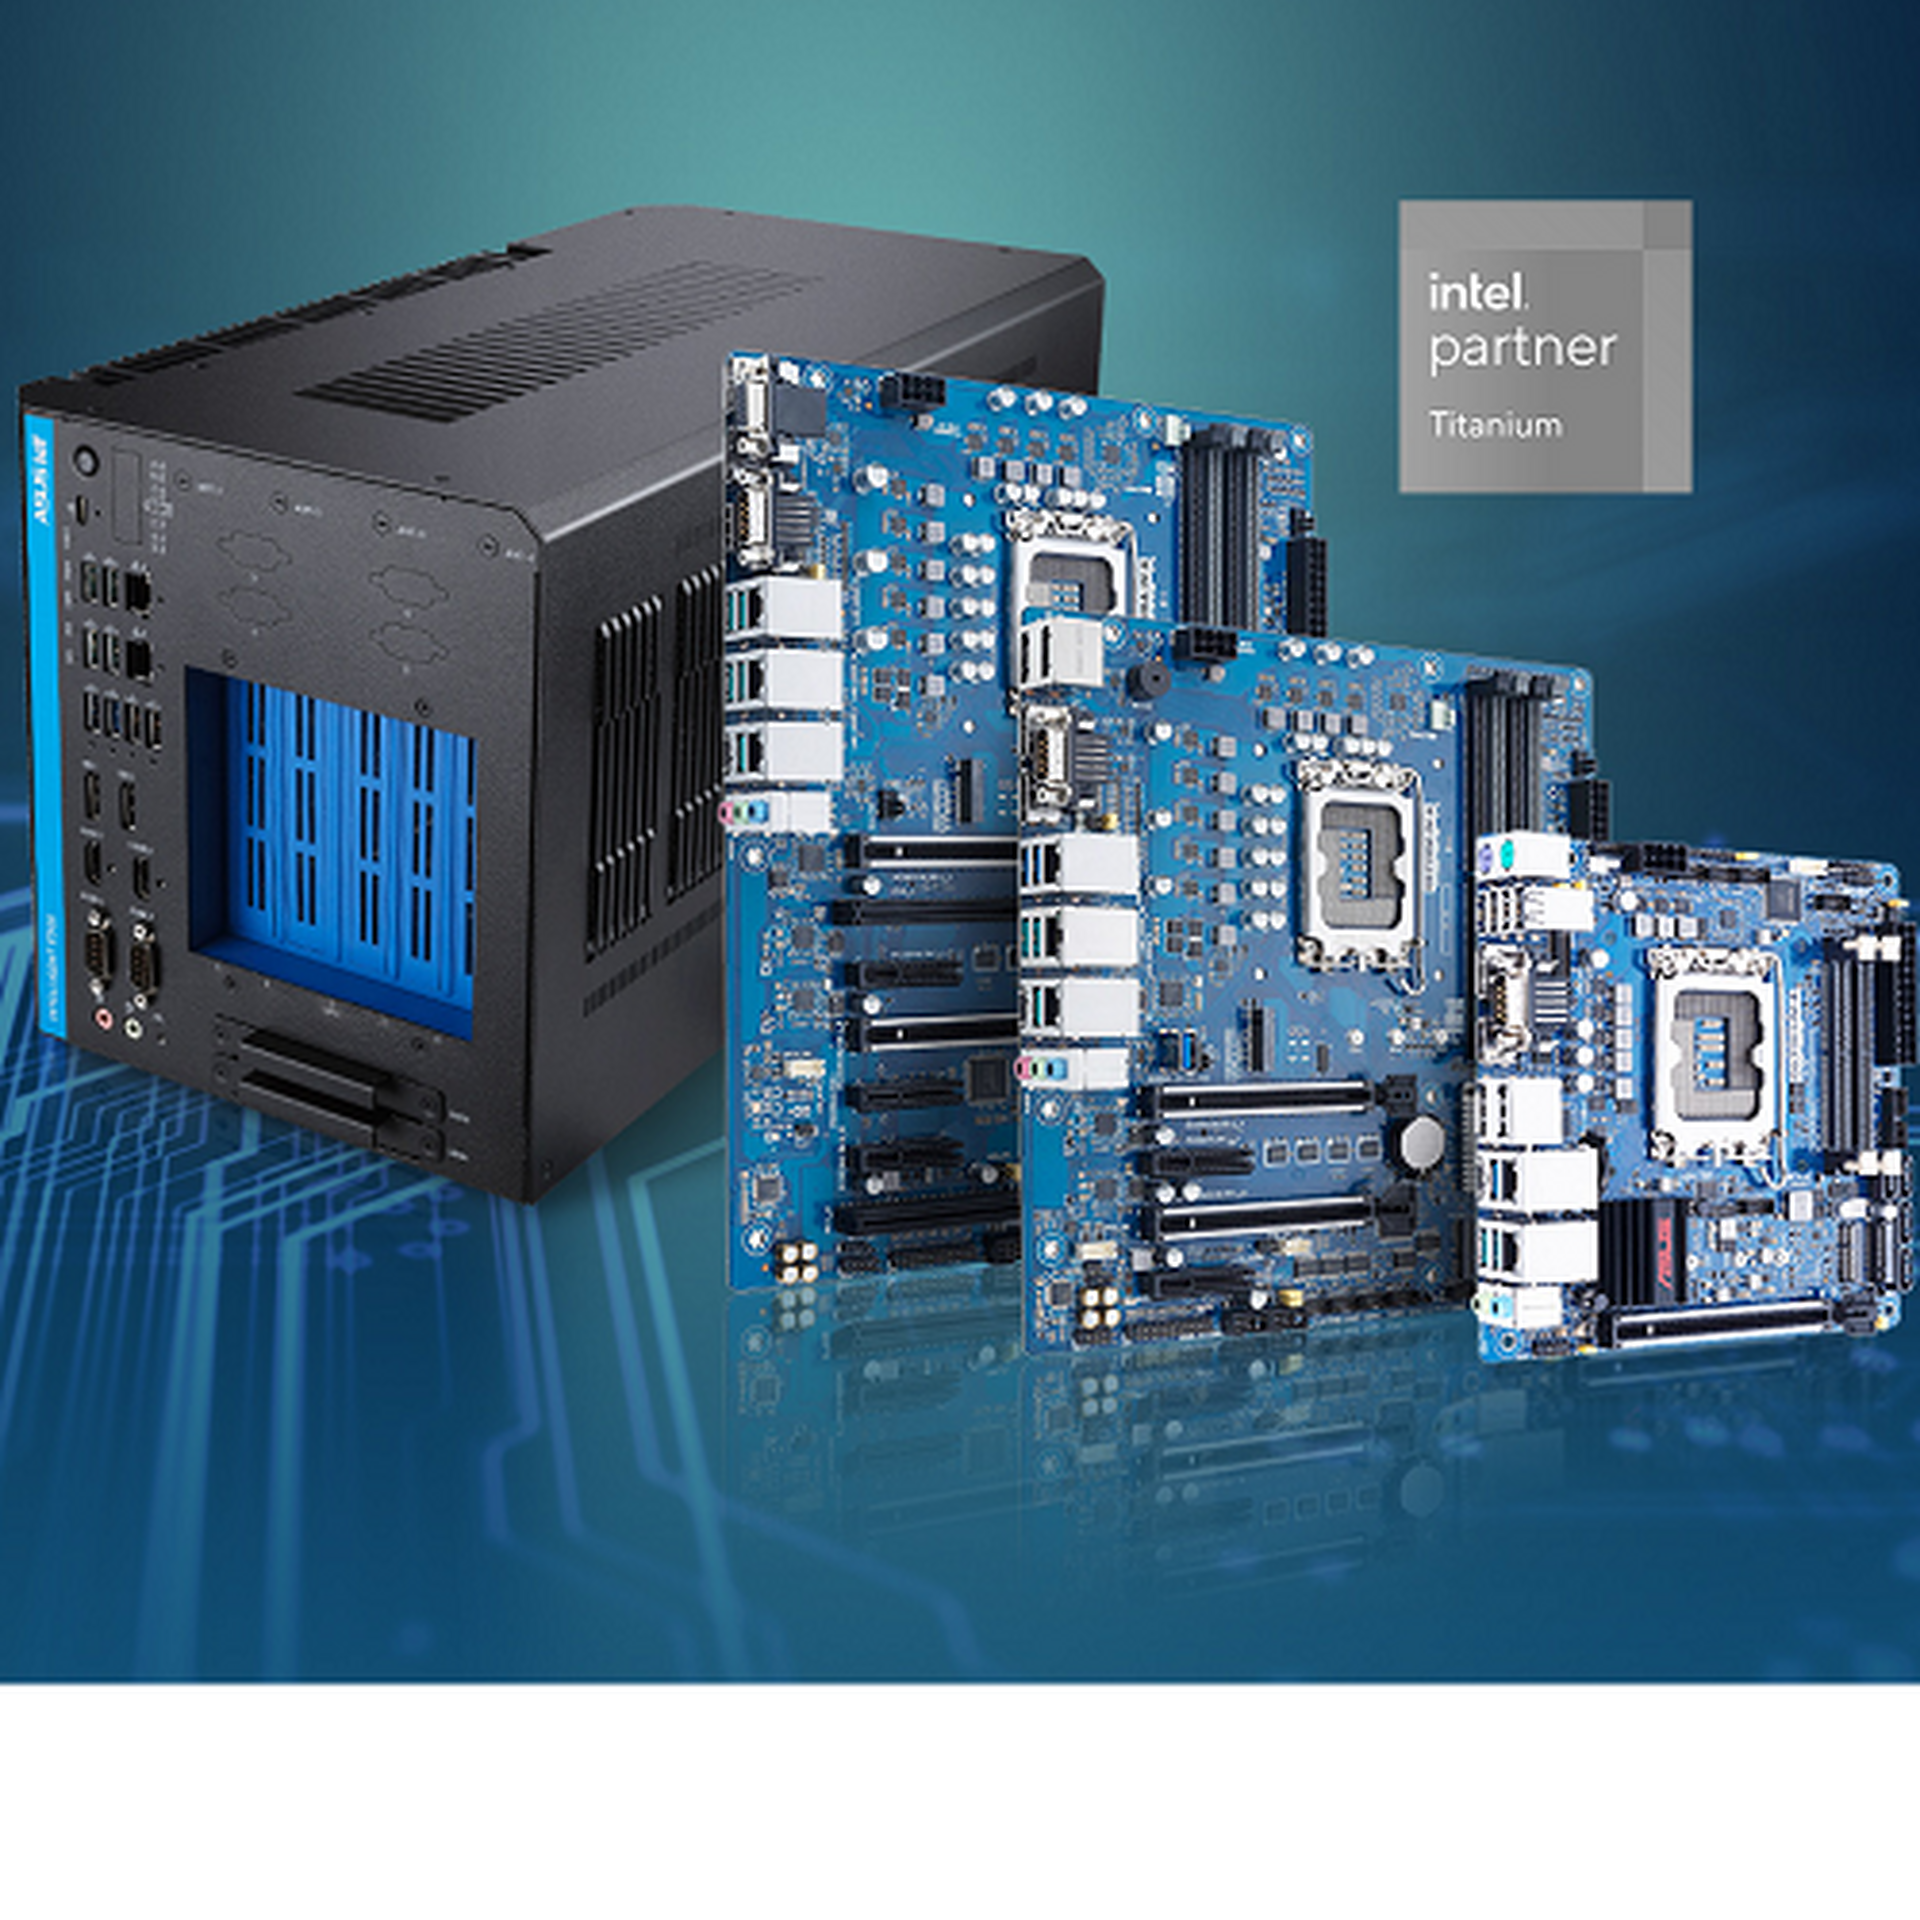 Asus IOT ind motherboards